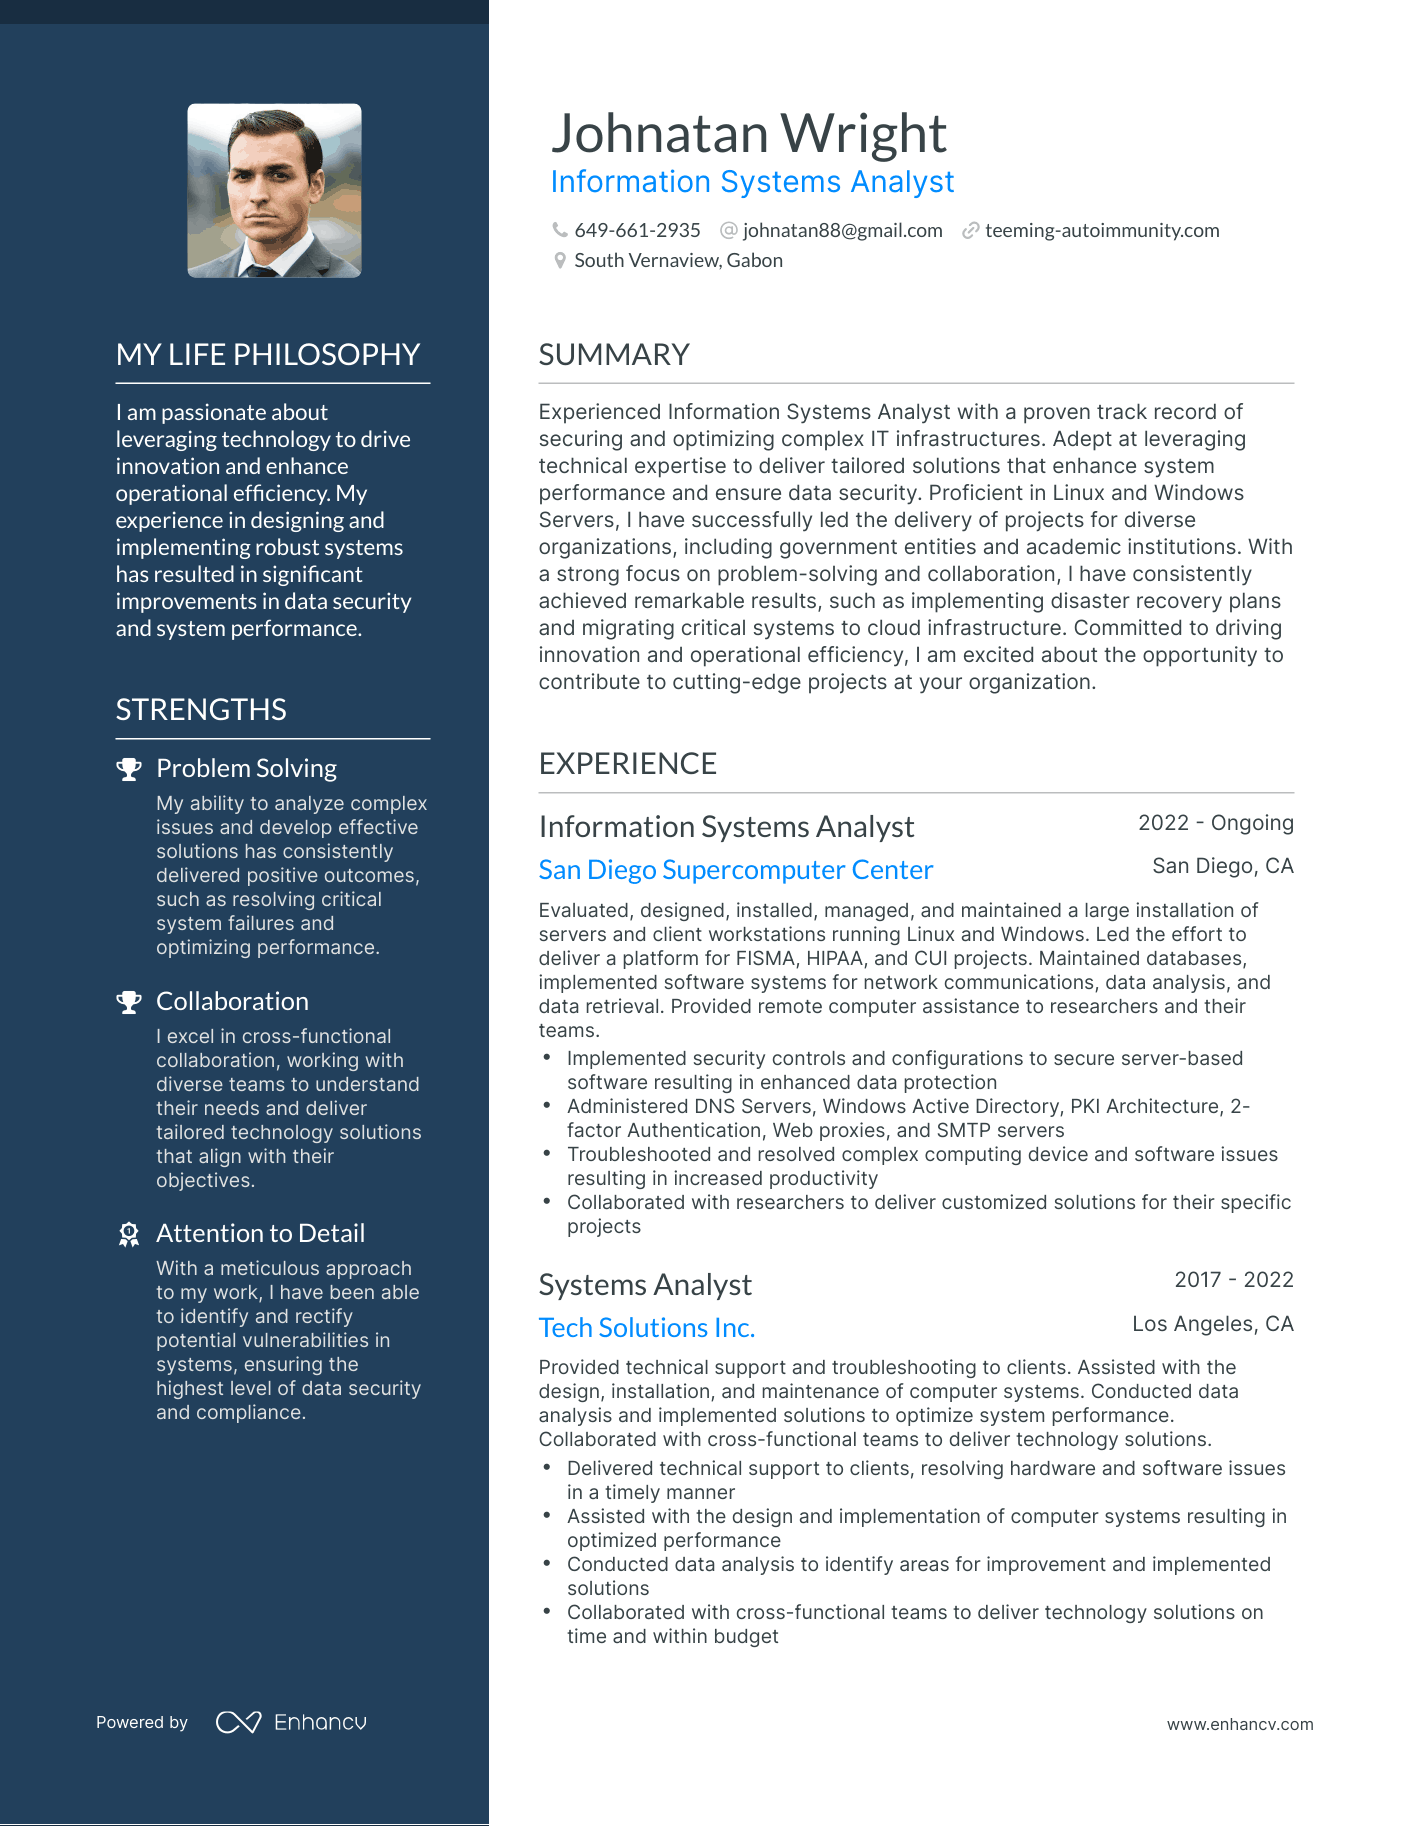 Information Systems Analyst resume example